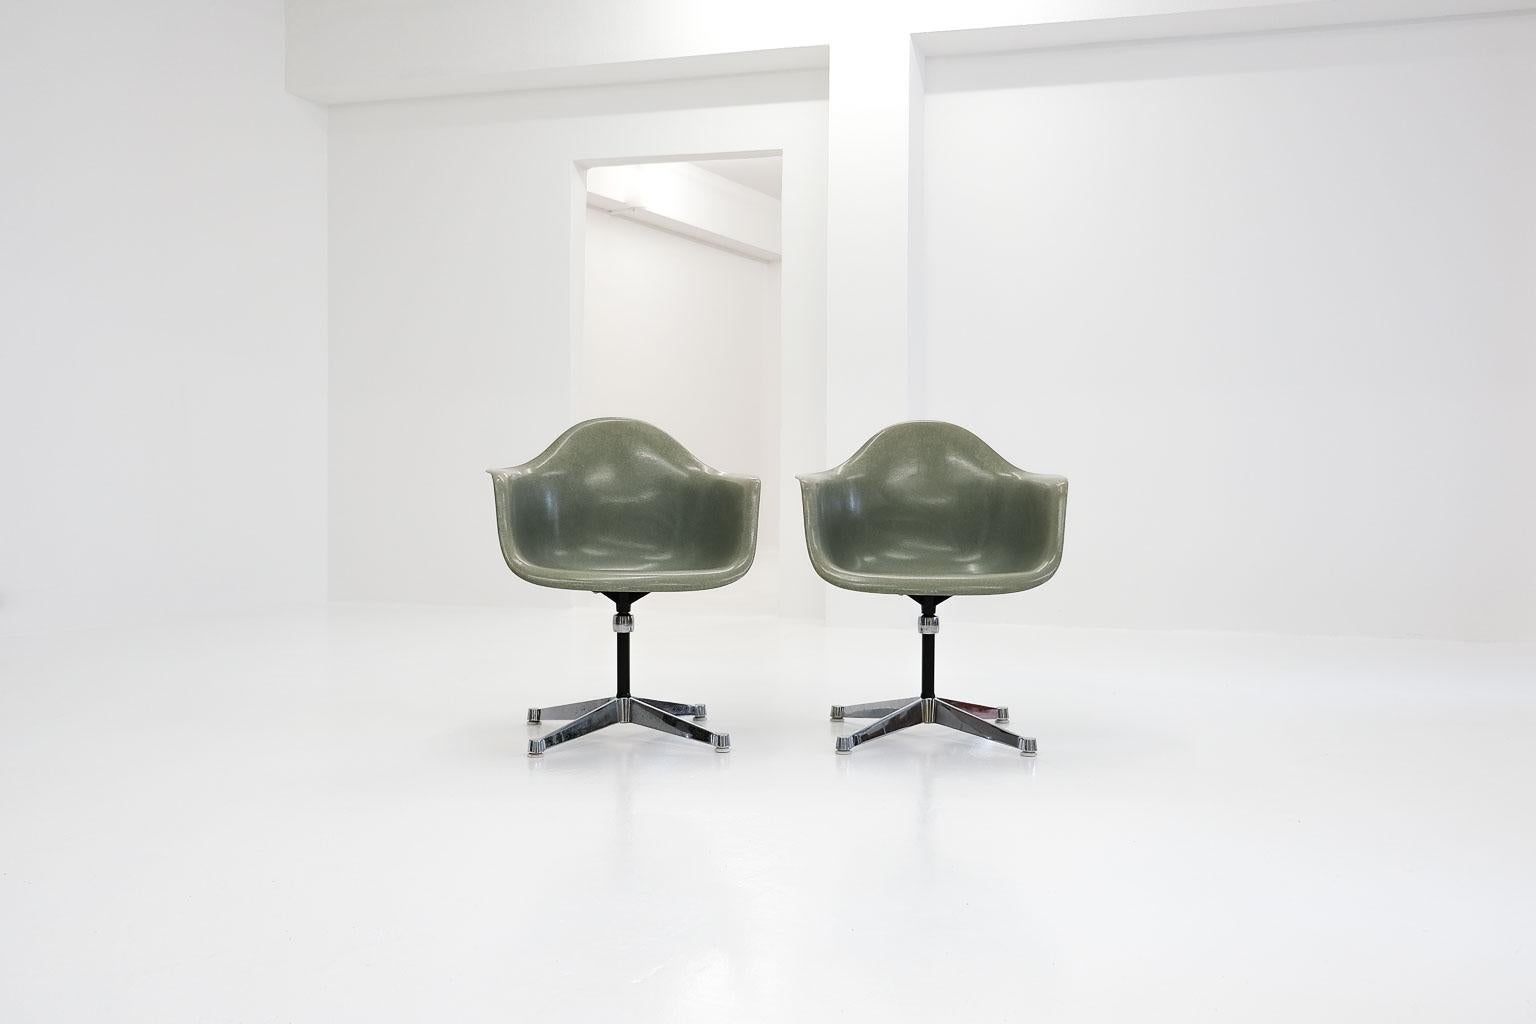 a couple of eames armchairs with contract base. the perfectly matching fiberglass shells in the color called seafoam have become rar, and are in very good vintage condition (no cracks etc.). produced by herman miller with the comfortable flat arm